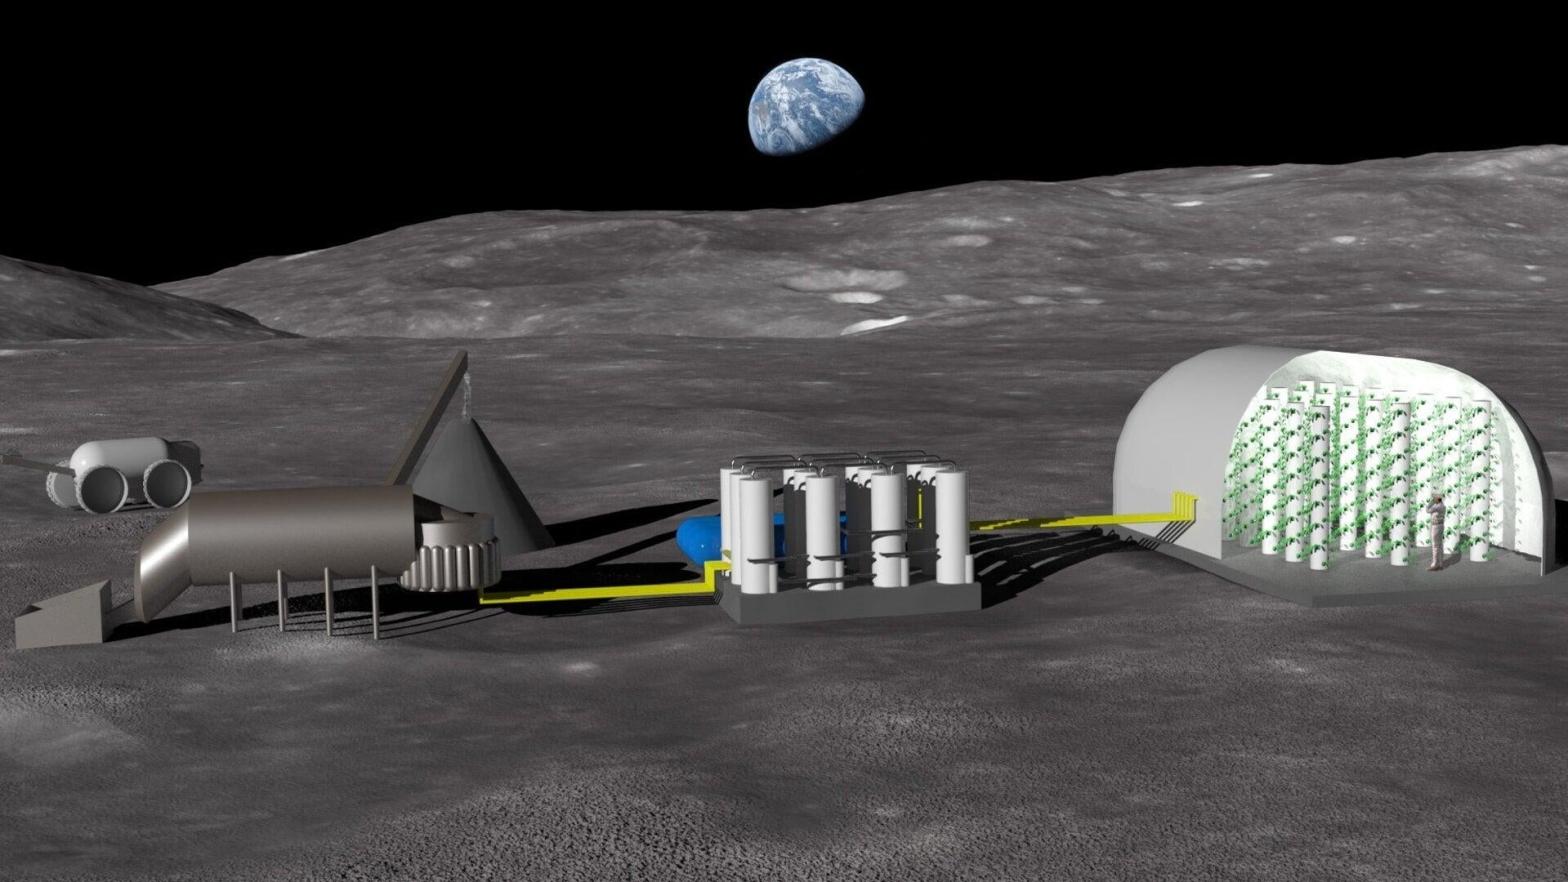 An artist's rendering of a plant designed to create nutrient-rich water from lunar soil. The regolith passes through a sorter (left), then a processing plant to extract nutrients (middle), before being dissolved in water and fed into a hydroponic greenhouse (right). (Image: Solsys Mining)